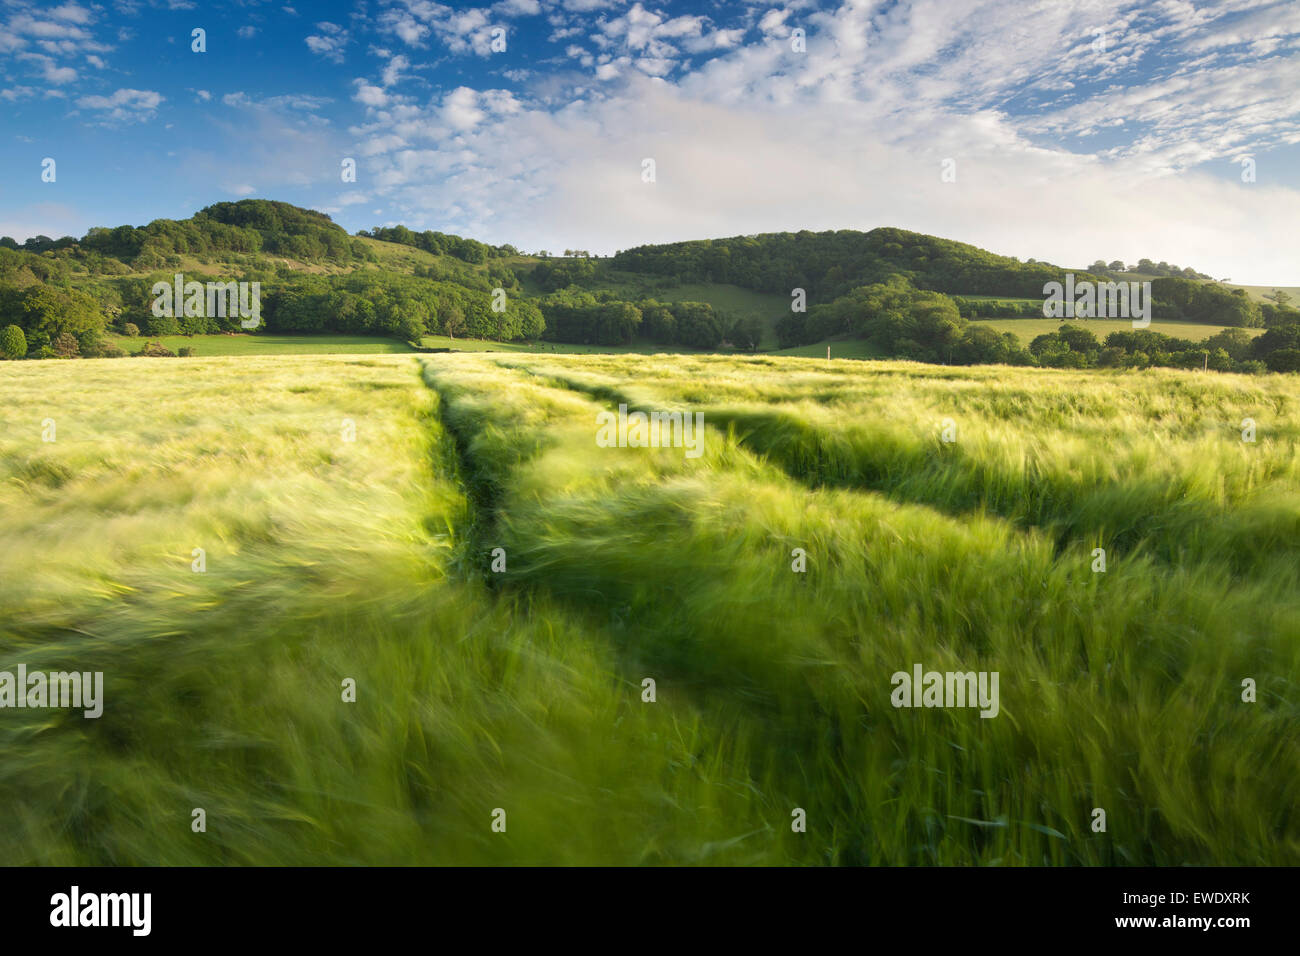 A field of barley crop blowing in the wind in East Sussex, England, UK Stock Photo